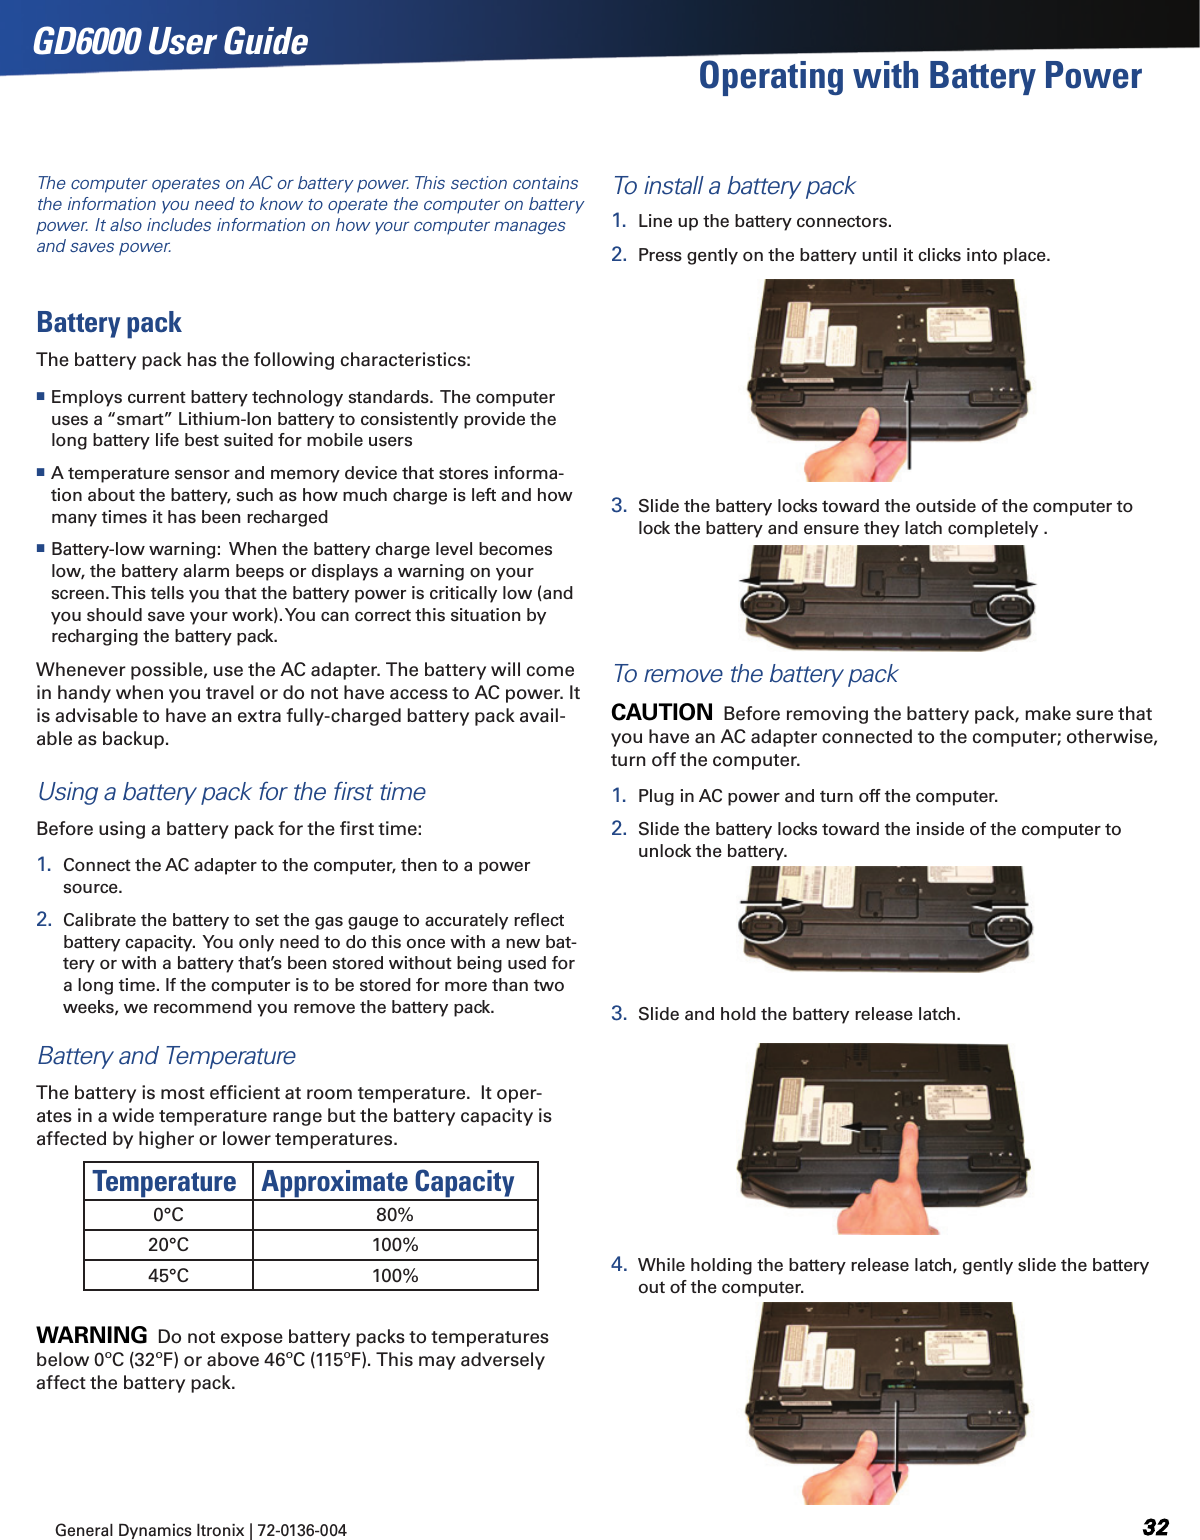 General Dynamics Itronix | 72-0136-004  GD6000 User GuideThe computer operates on AC or battery power. This section contains the information you need to know to operate the computer on battery power. It also includes information on how your computer manages and saves power.Battery packThe battery pack has the following characteristics:  Employs current battery technology standards.  The computer uses a “smart” Lithium-Ion battery to consistently provide the long battery life best suited for mobile users A temperature sensor and memory device that stores informa-tion about the battery, such as how much charge is left and how many times it has been recharged Battery-low warning:  When the battery charge level becomes low, the battery alarm beeps or displays a warning on your screen. This tells you that the battery power is critically low (and you should save your work). You can correct this situation by recharging the battery pack.Whenever possible, use the AC adapter. The battery will come in handy when you travel or do not have access to AC power. It is advisable to have an extra fully-charged battery pack avail-able as backup. Using a battery pack for the ﬁrst timeBefore using a battery pack for the ﬁrst time:1.  Connect the AC adapter to the computer, then to a power source.2.  Calibrate the battery to set the gas gauge to accurately reﬂect battery capacity.  You only need to do this once with a new bat-tery or with a battery that’s been stored without being used for a long time. If the computer is to be stored for more than two weeks, we recommend you remove the battery pack.Battery and TemperatureThe battery is most efﬁcient at room temperature.  It oper-ates in a wide temperature range but the battery capacity is affected by higher or lower temperatures.Temperature Approximate Capacity0°C 80%20°C 100%45°C 100%Warning  Do not expose battery packs to temperatures below 0ºC (32ºF) or above 46ºC (115ºF). This may adversely affect the battery pack.To install a battery pack1.  Line up the battery connectors.2.  Press gently on the battery until it clicks into place.3.  Slide the battery locks toward the outside of the computer to lock the battery and ensure they latch completely .To remove the battery packCaution  Before removing the battery pack, make sure that you have an AC adapter connected to the computer; otherwise, turn off the computer.1.  Plug in AC power and turn off the computer.2.  Slide the battery locks toward the inside of the computer to unlock the battery.3.  Slide and hold the battery release latch.4.  While holding the battery release latch, gently slide the battery out of the computer.Operating with Battery Power